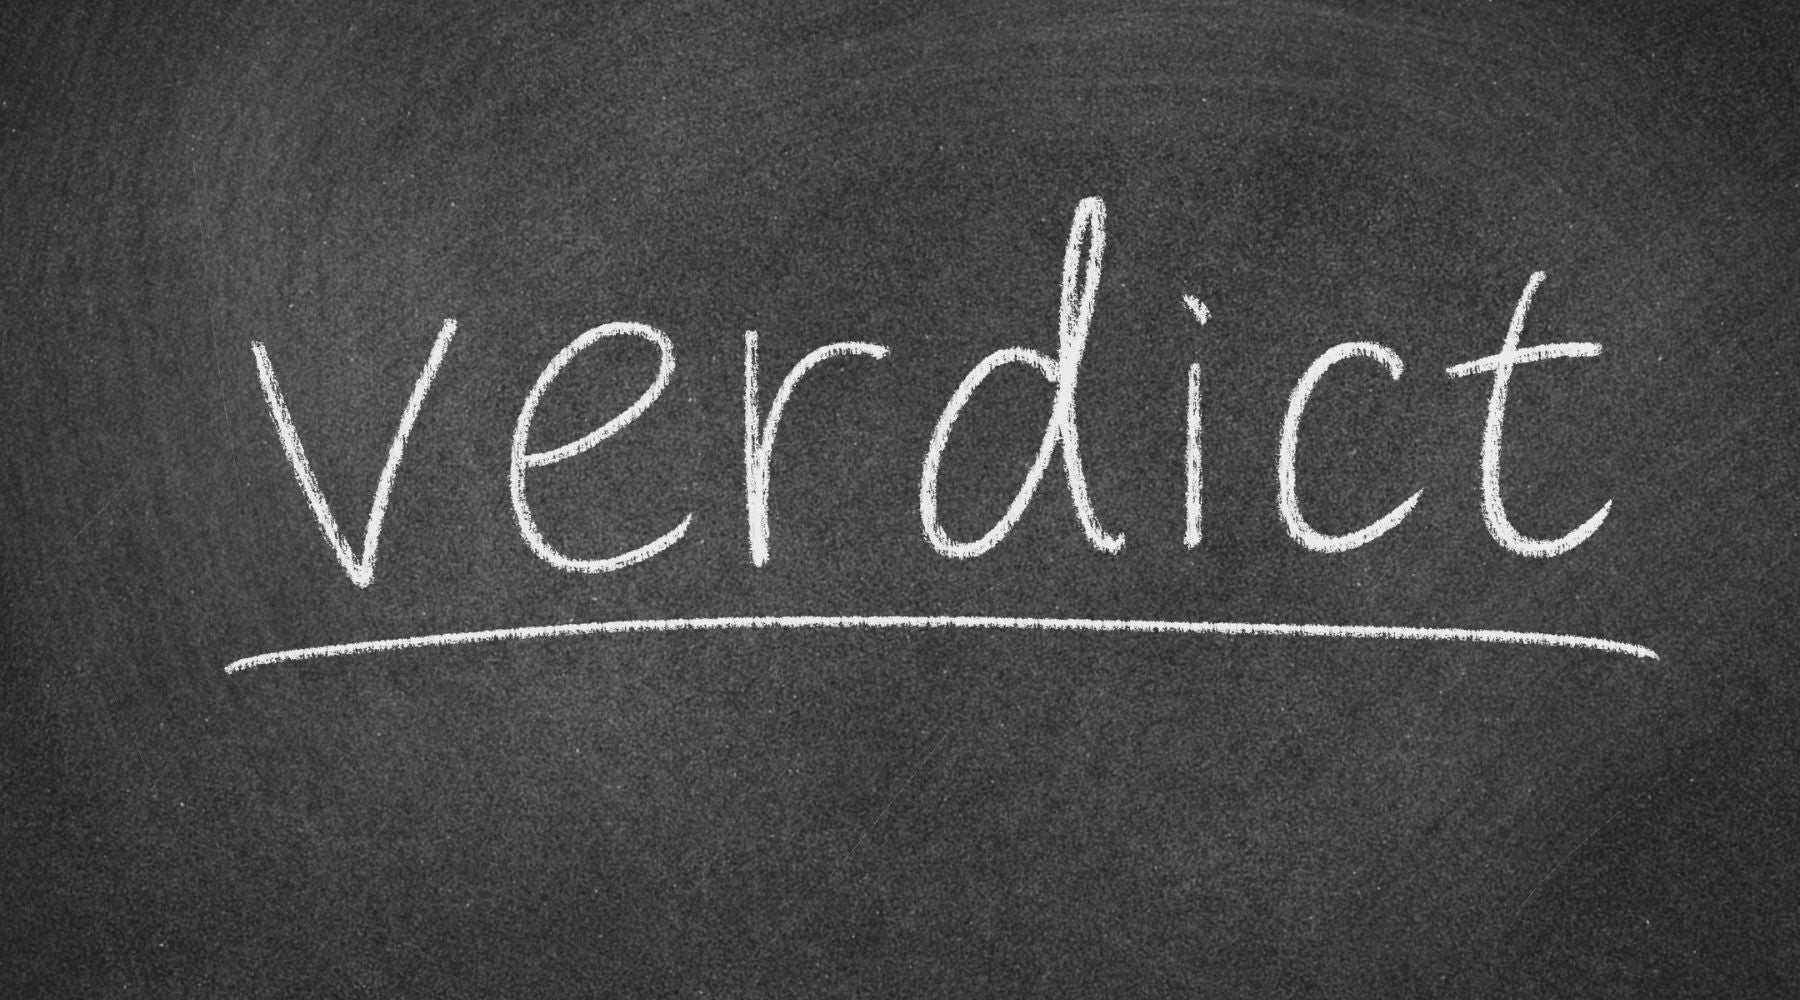 a picture of a chalk board and the word "verdict" written on it in chalk.